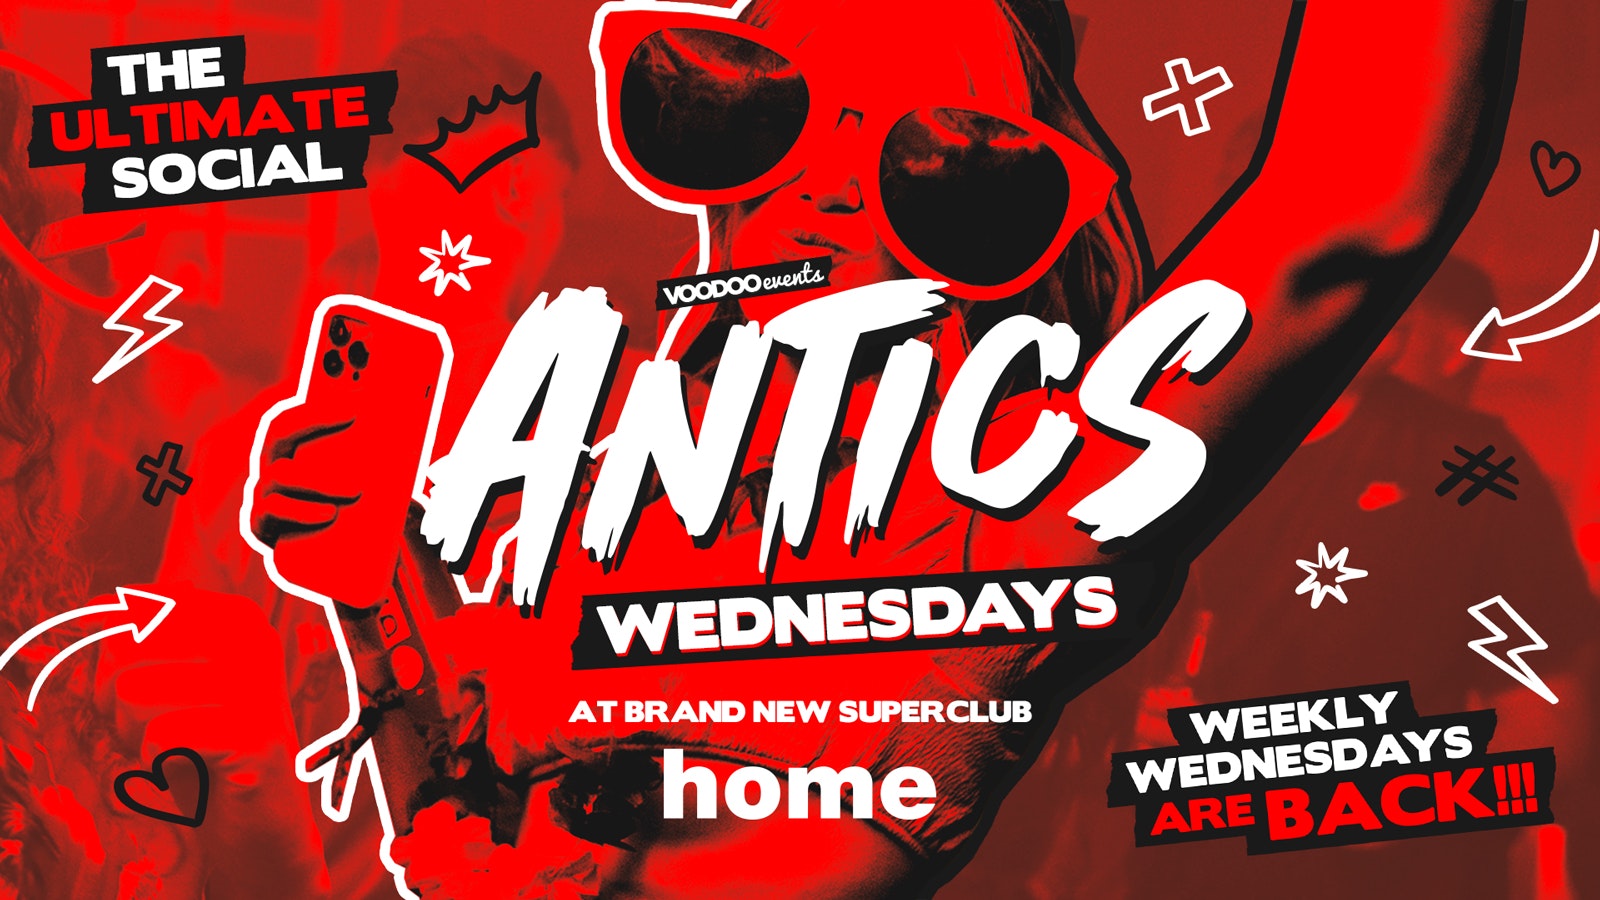 Antics @ THE BRAND NEW SUPER CLUB HOME – Wednesday 21st August